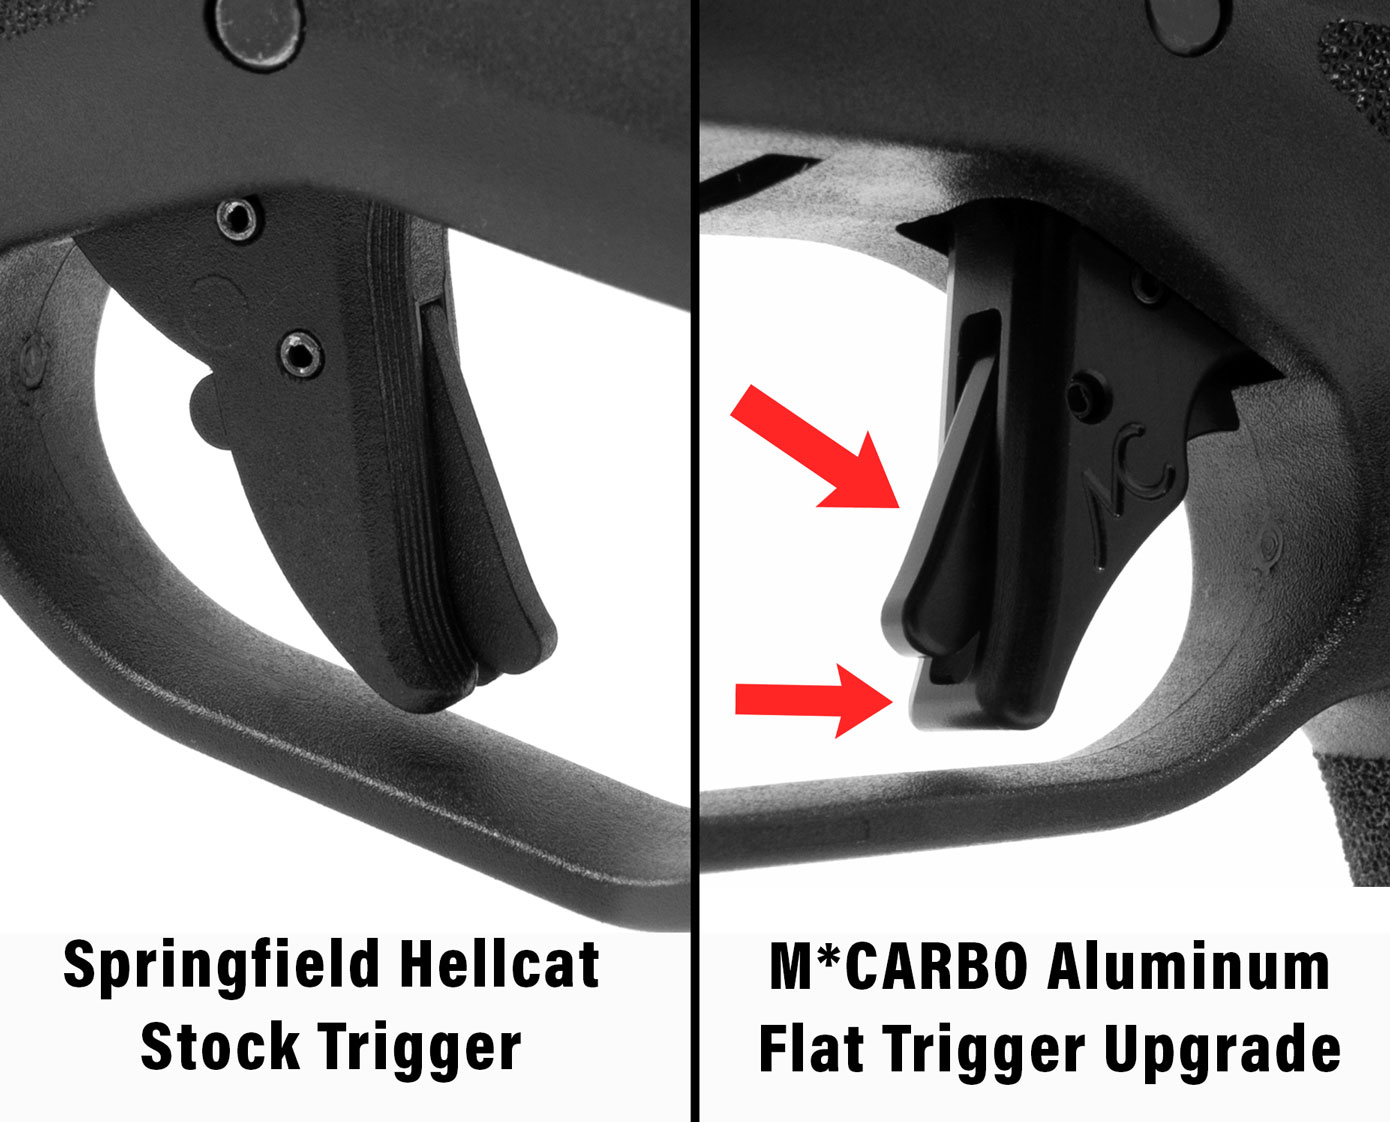 M*CARBO Springfield Hellcat Flat Trigger - Safety Blade Comparison